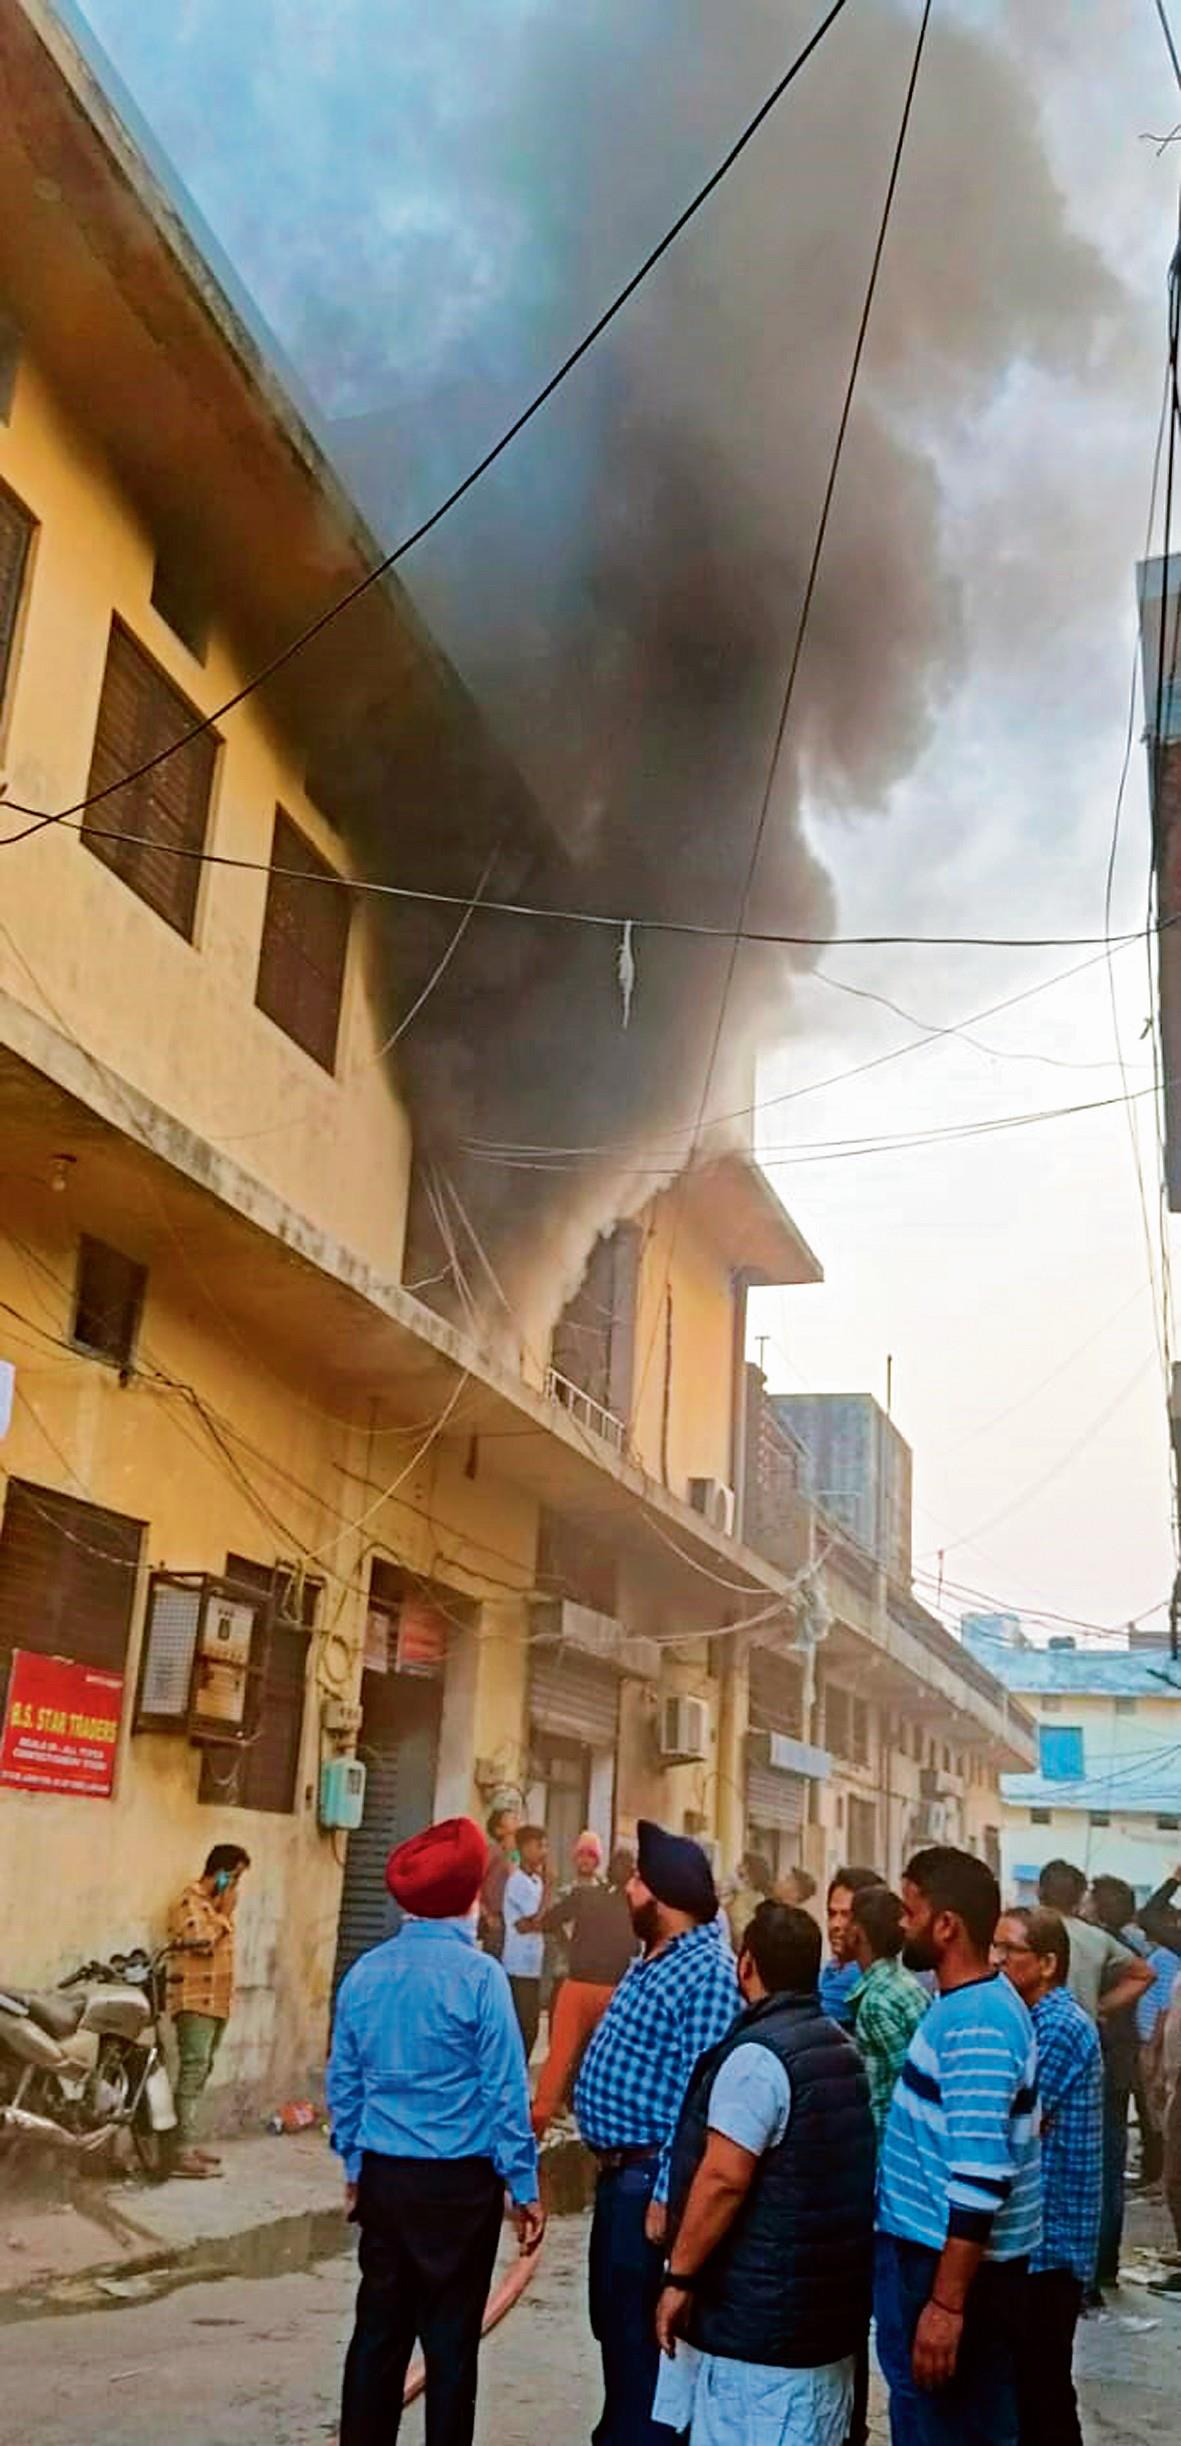 Fire breaks out at garment factory